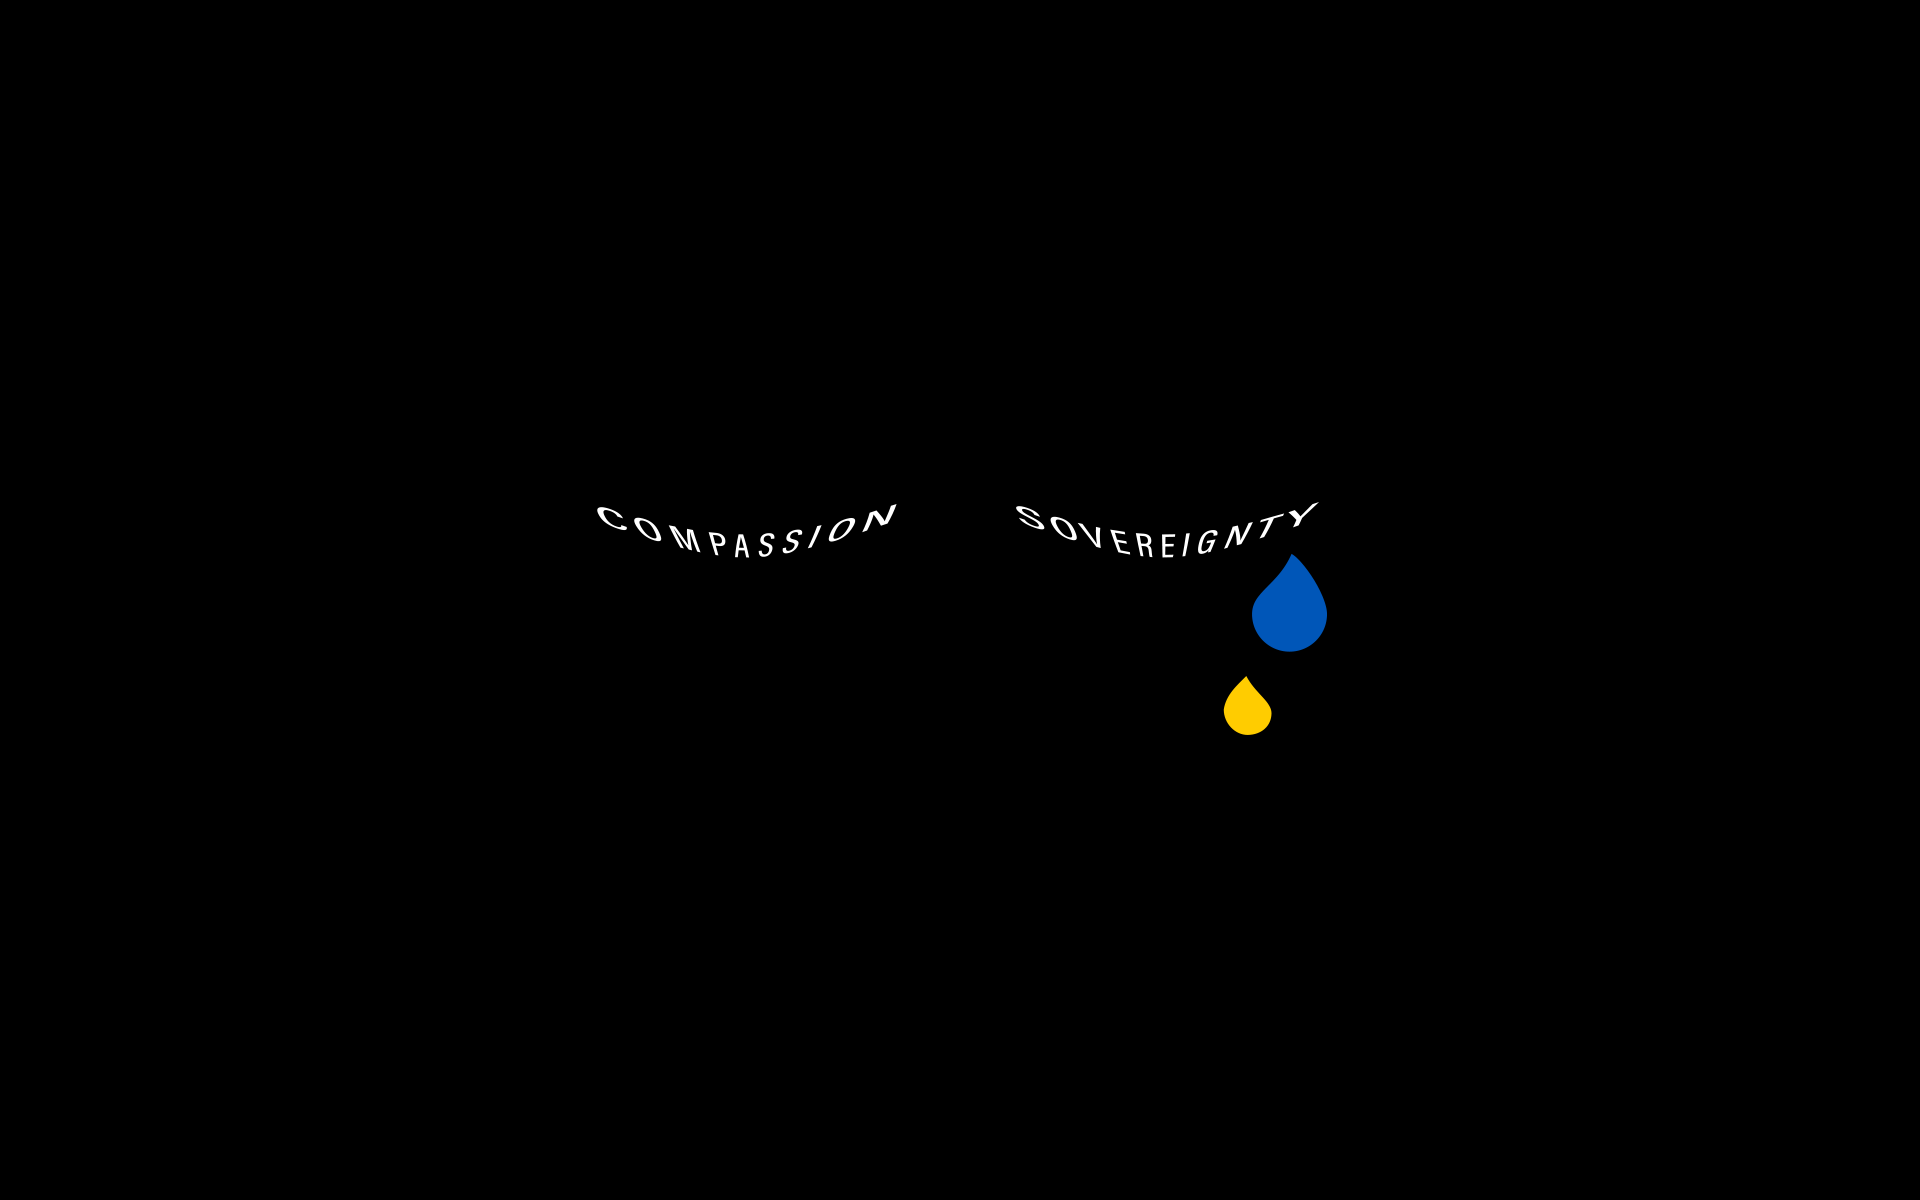 Graphic of "compassion" and "sovereignty" with blue and yellow tears